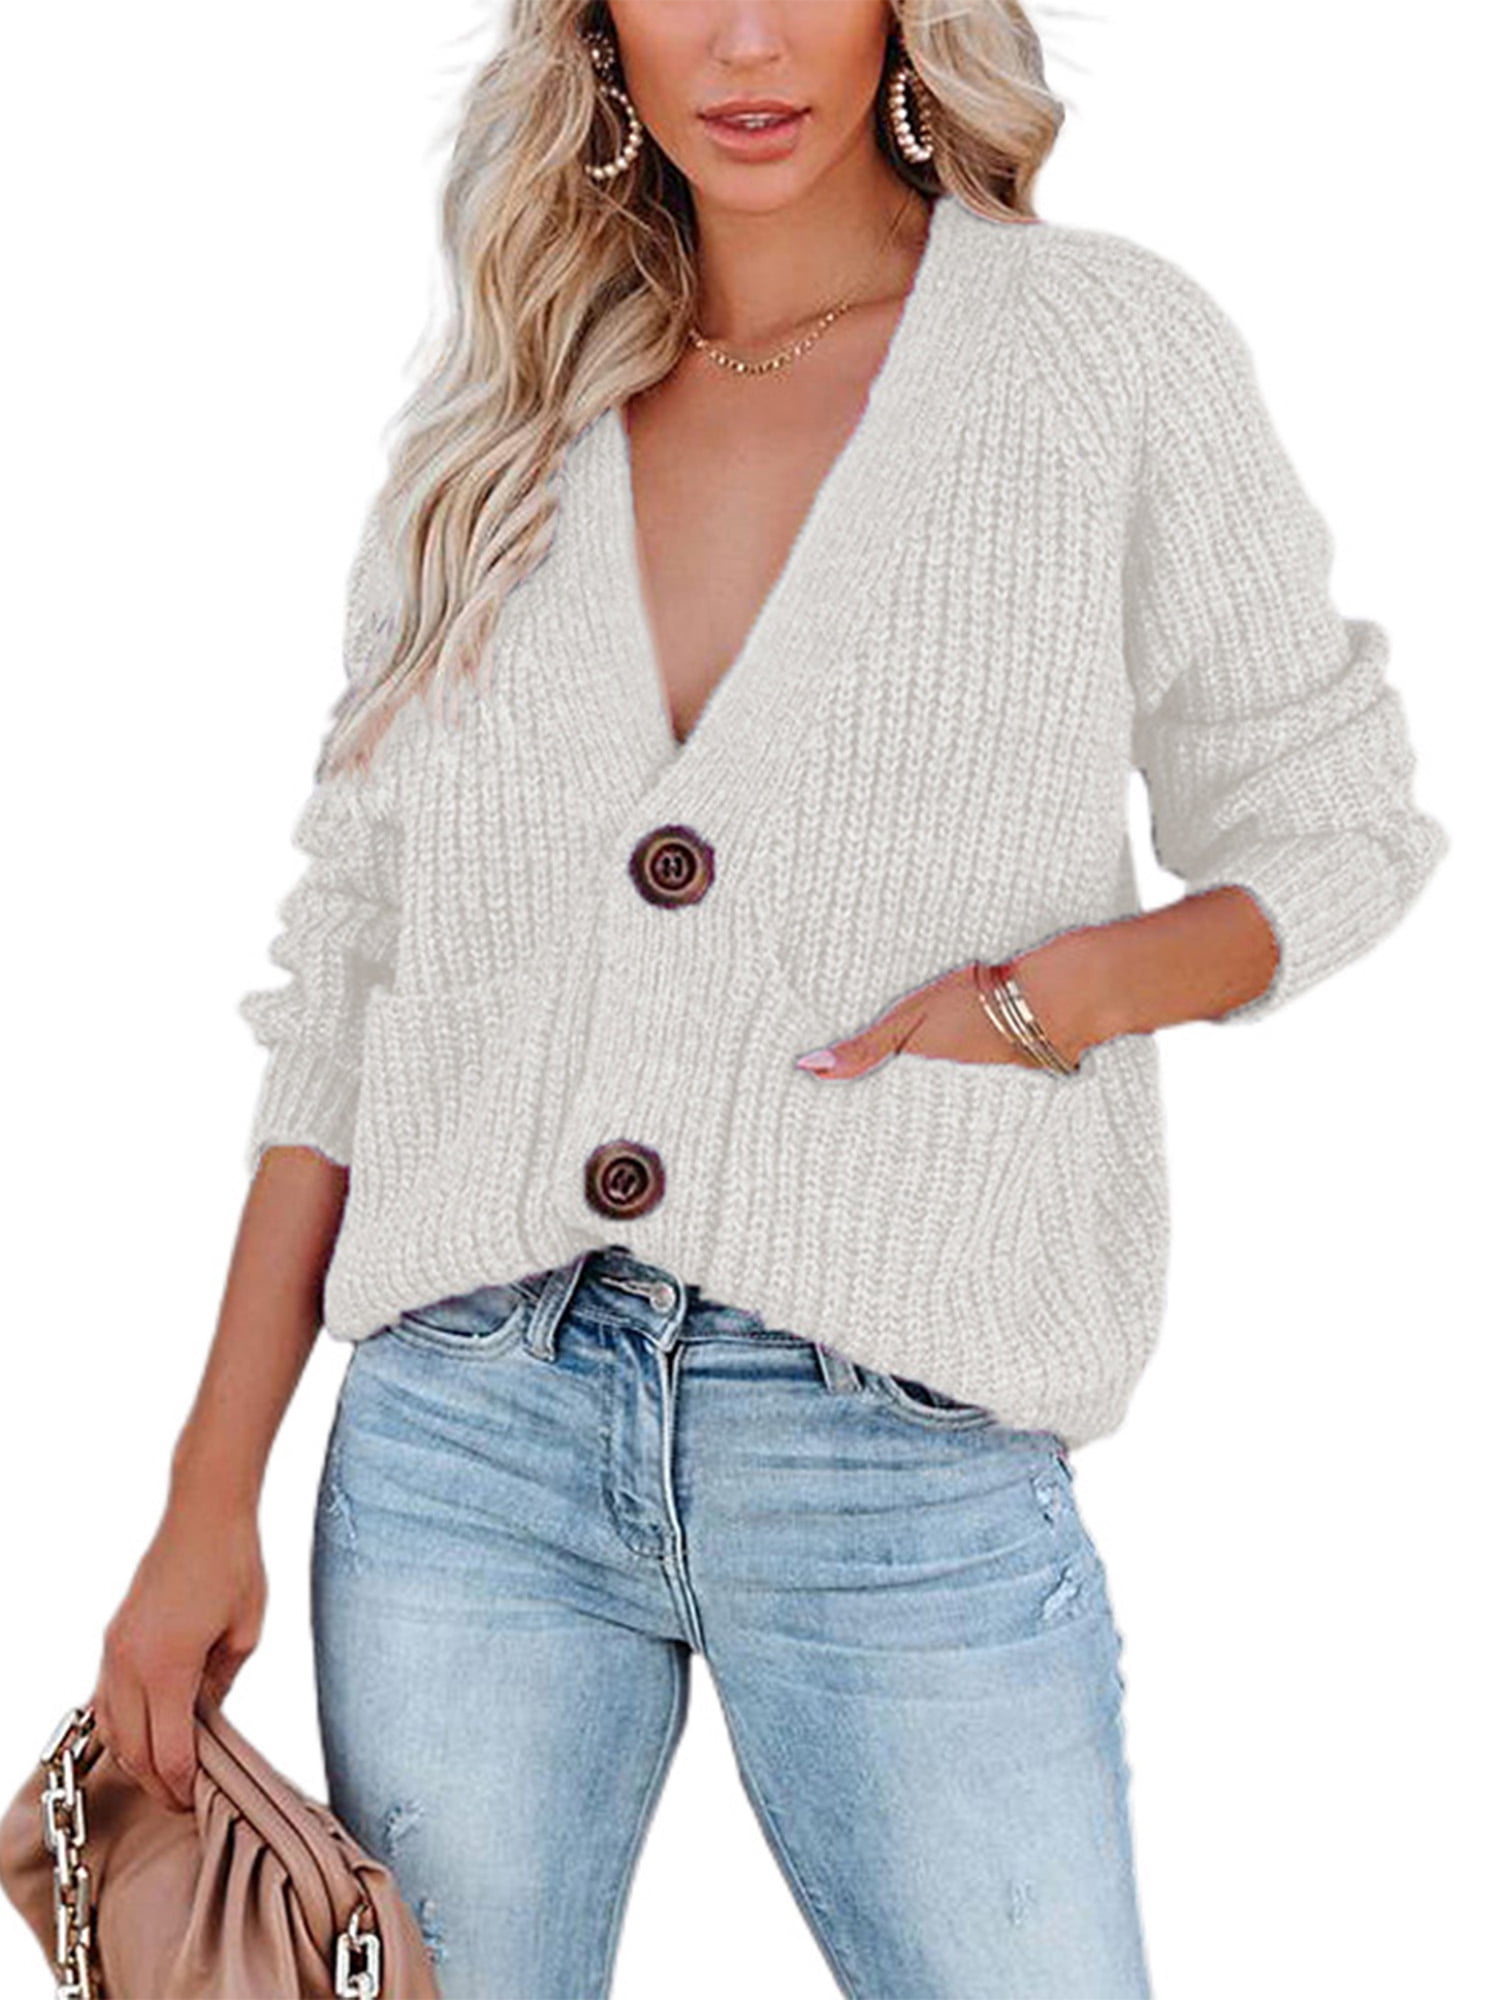 Cindysus Ladies Loose Buttons Sweater Women Knitwear Cardigans Chunky ...